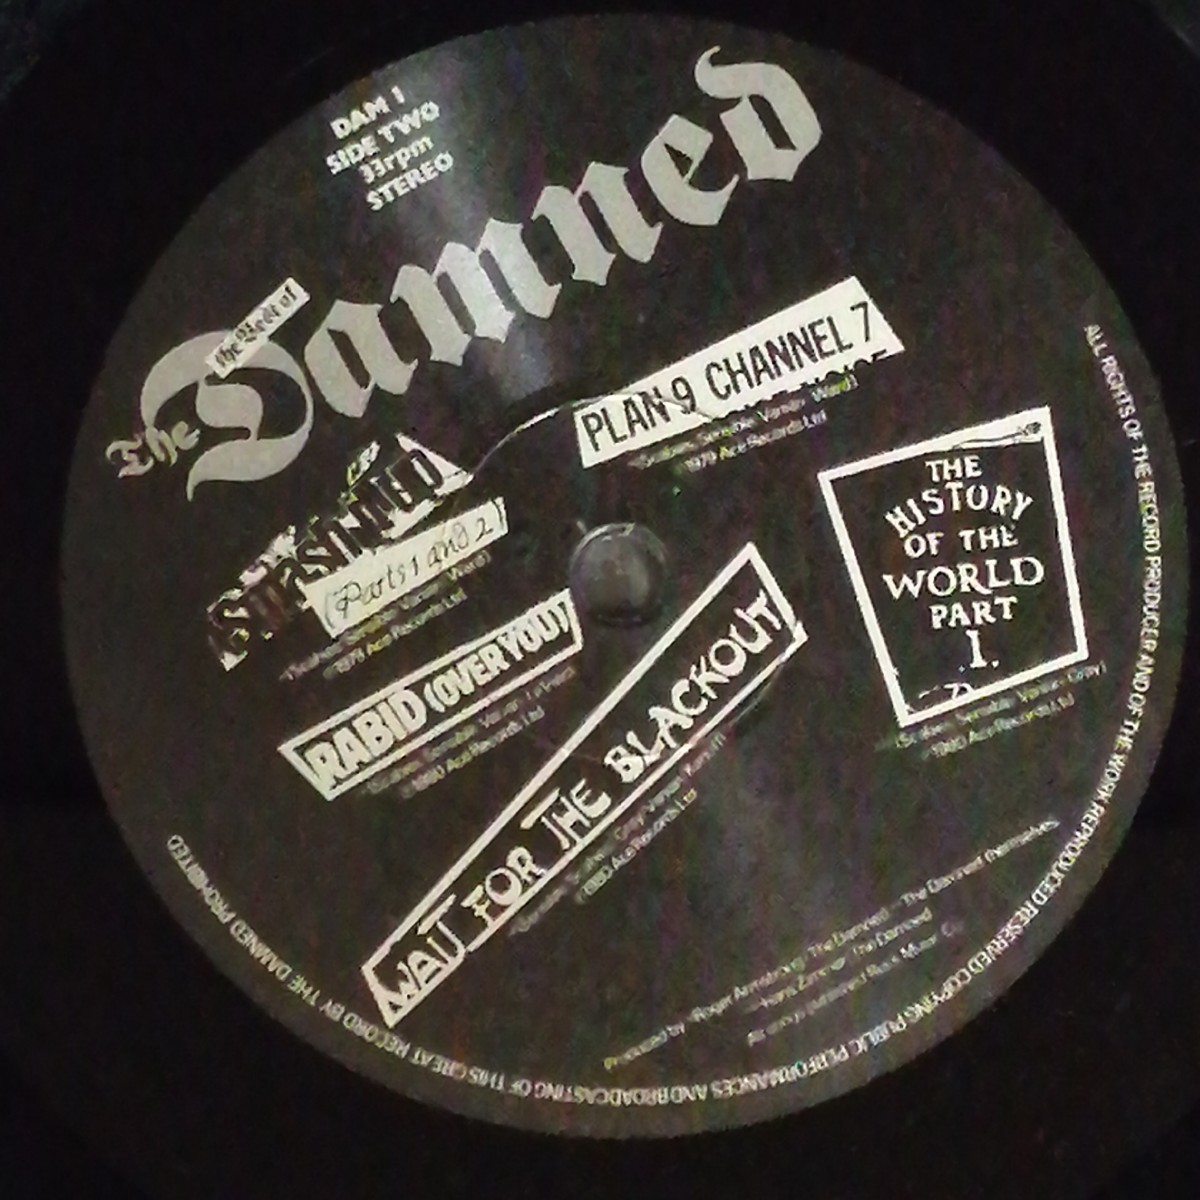 D02 中古LP 中古レコード ダムド ベスト THE DAMED another great record from the damned DAM1 UK盤の画像5